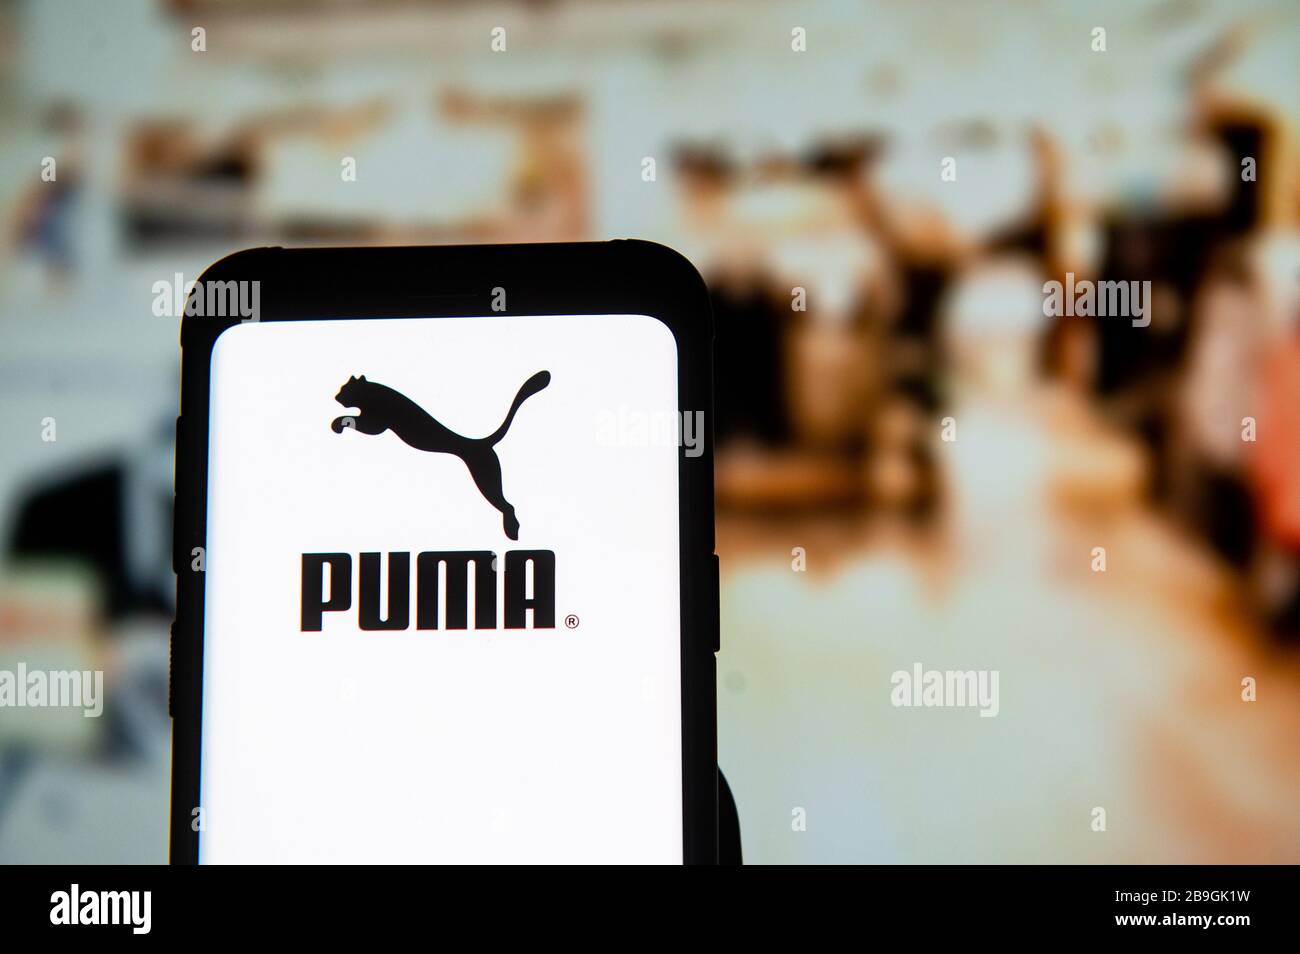 March 23, 2020, Poland: In this photo illustration a Puma logo seen displayed on a smartphone. (Credit Image: © Mateusz Slodkowski/SOPA Images via ZUMA Wire) Stock Photo